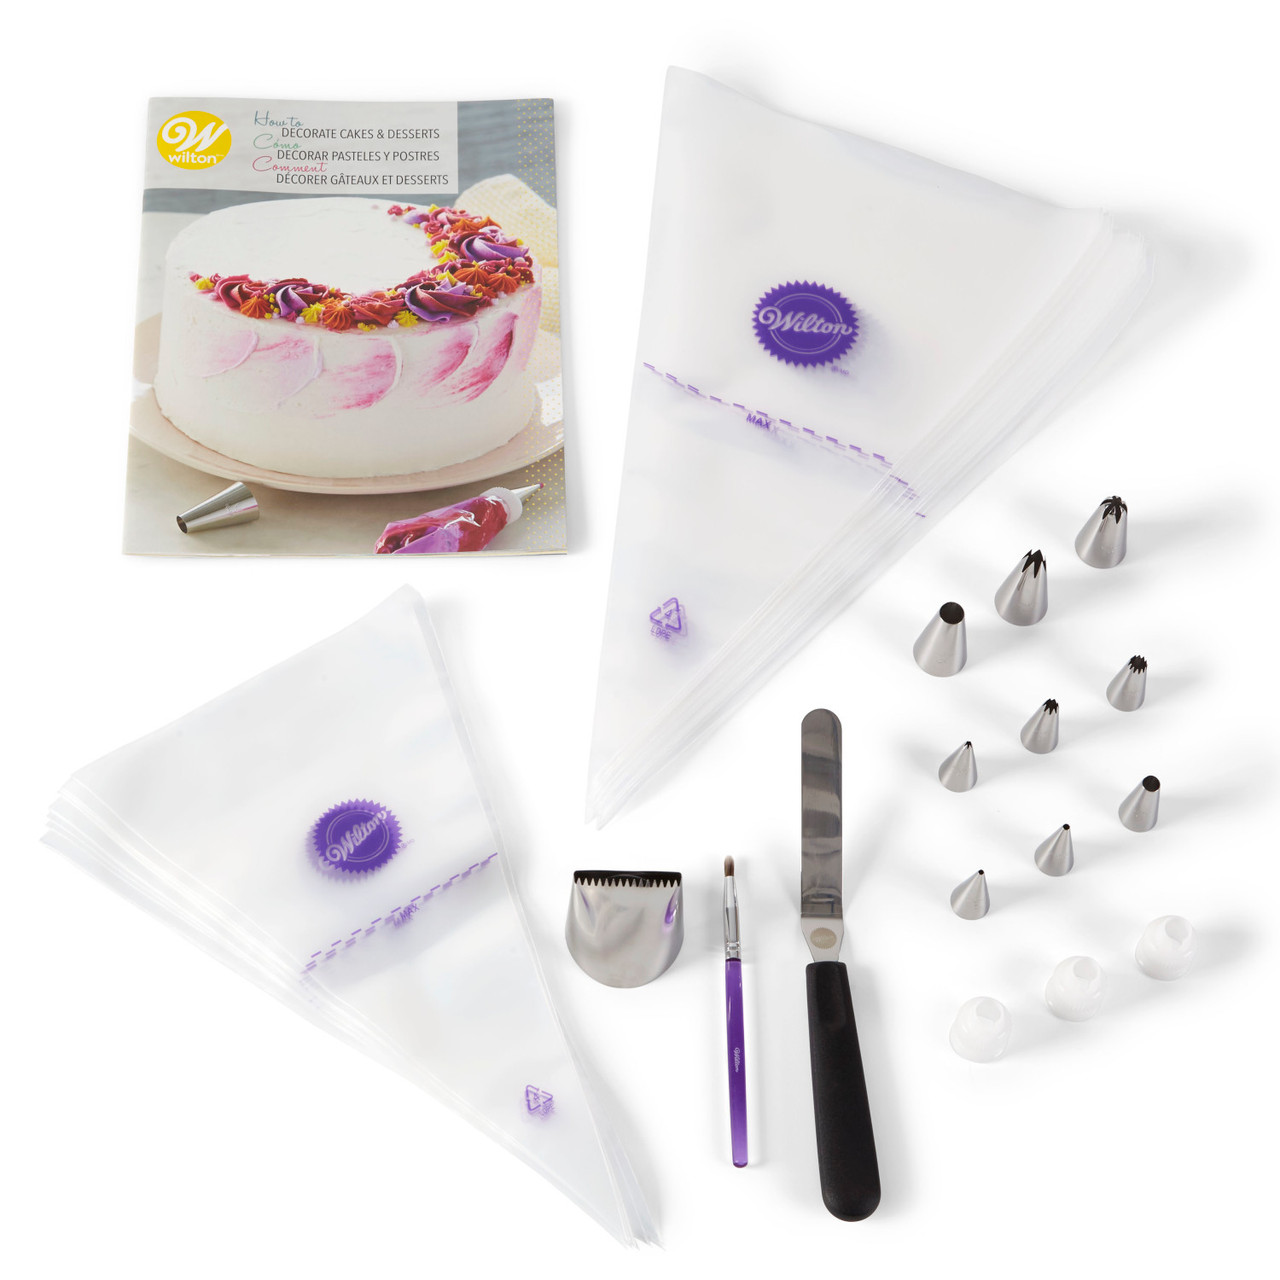 How to Decorate Cakes and Desserts Kit, 39-Piece - Wilton